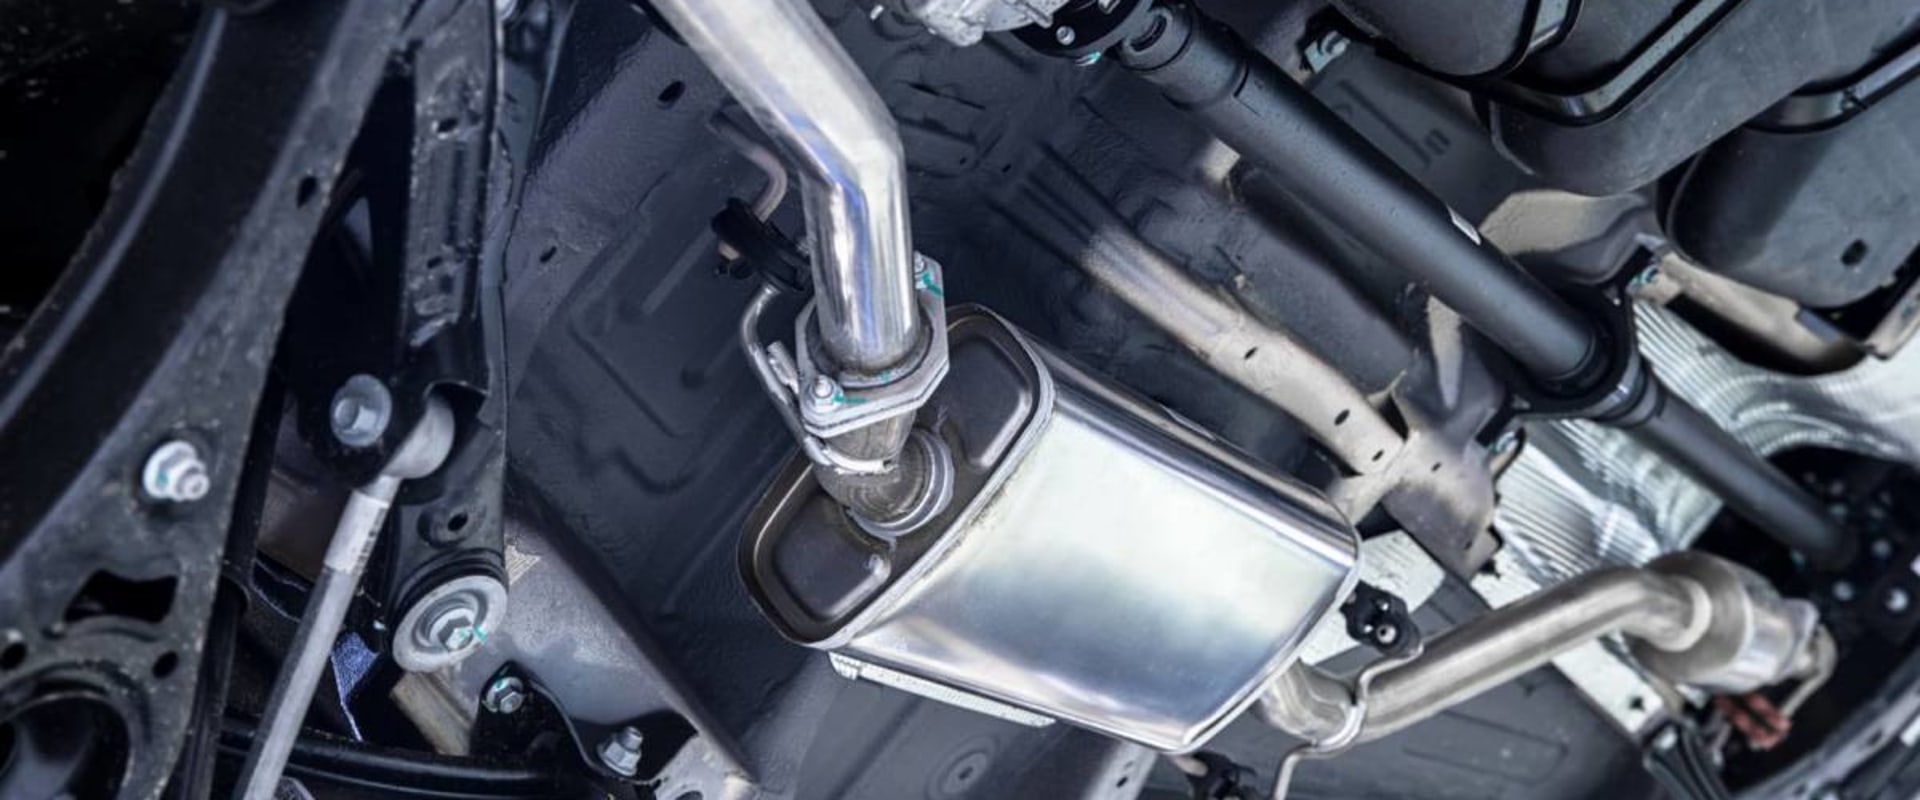 Everything You Need to Know About Mufflers